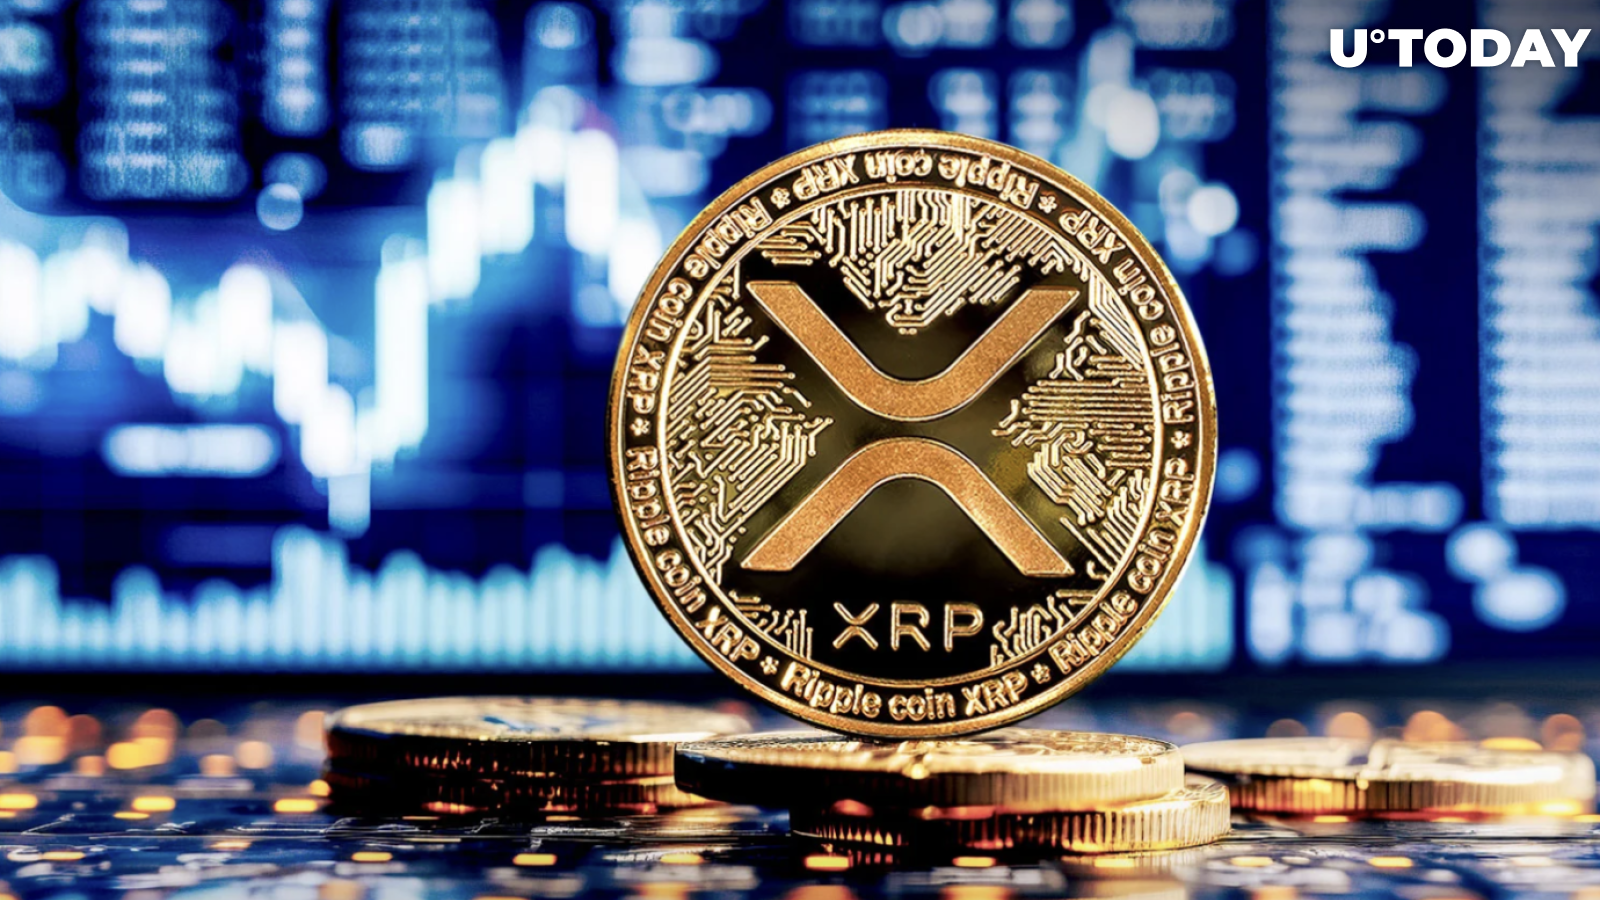 Whales Push XRP Price Higher, but There’s Worrying Sign